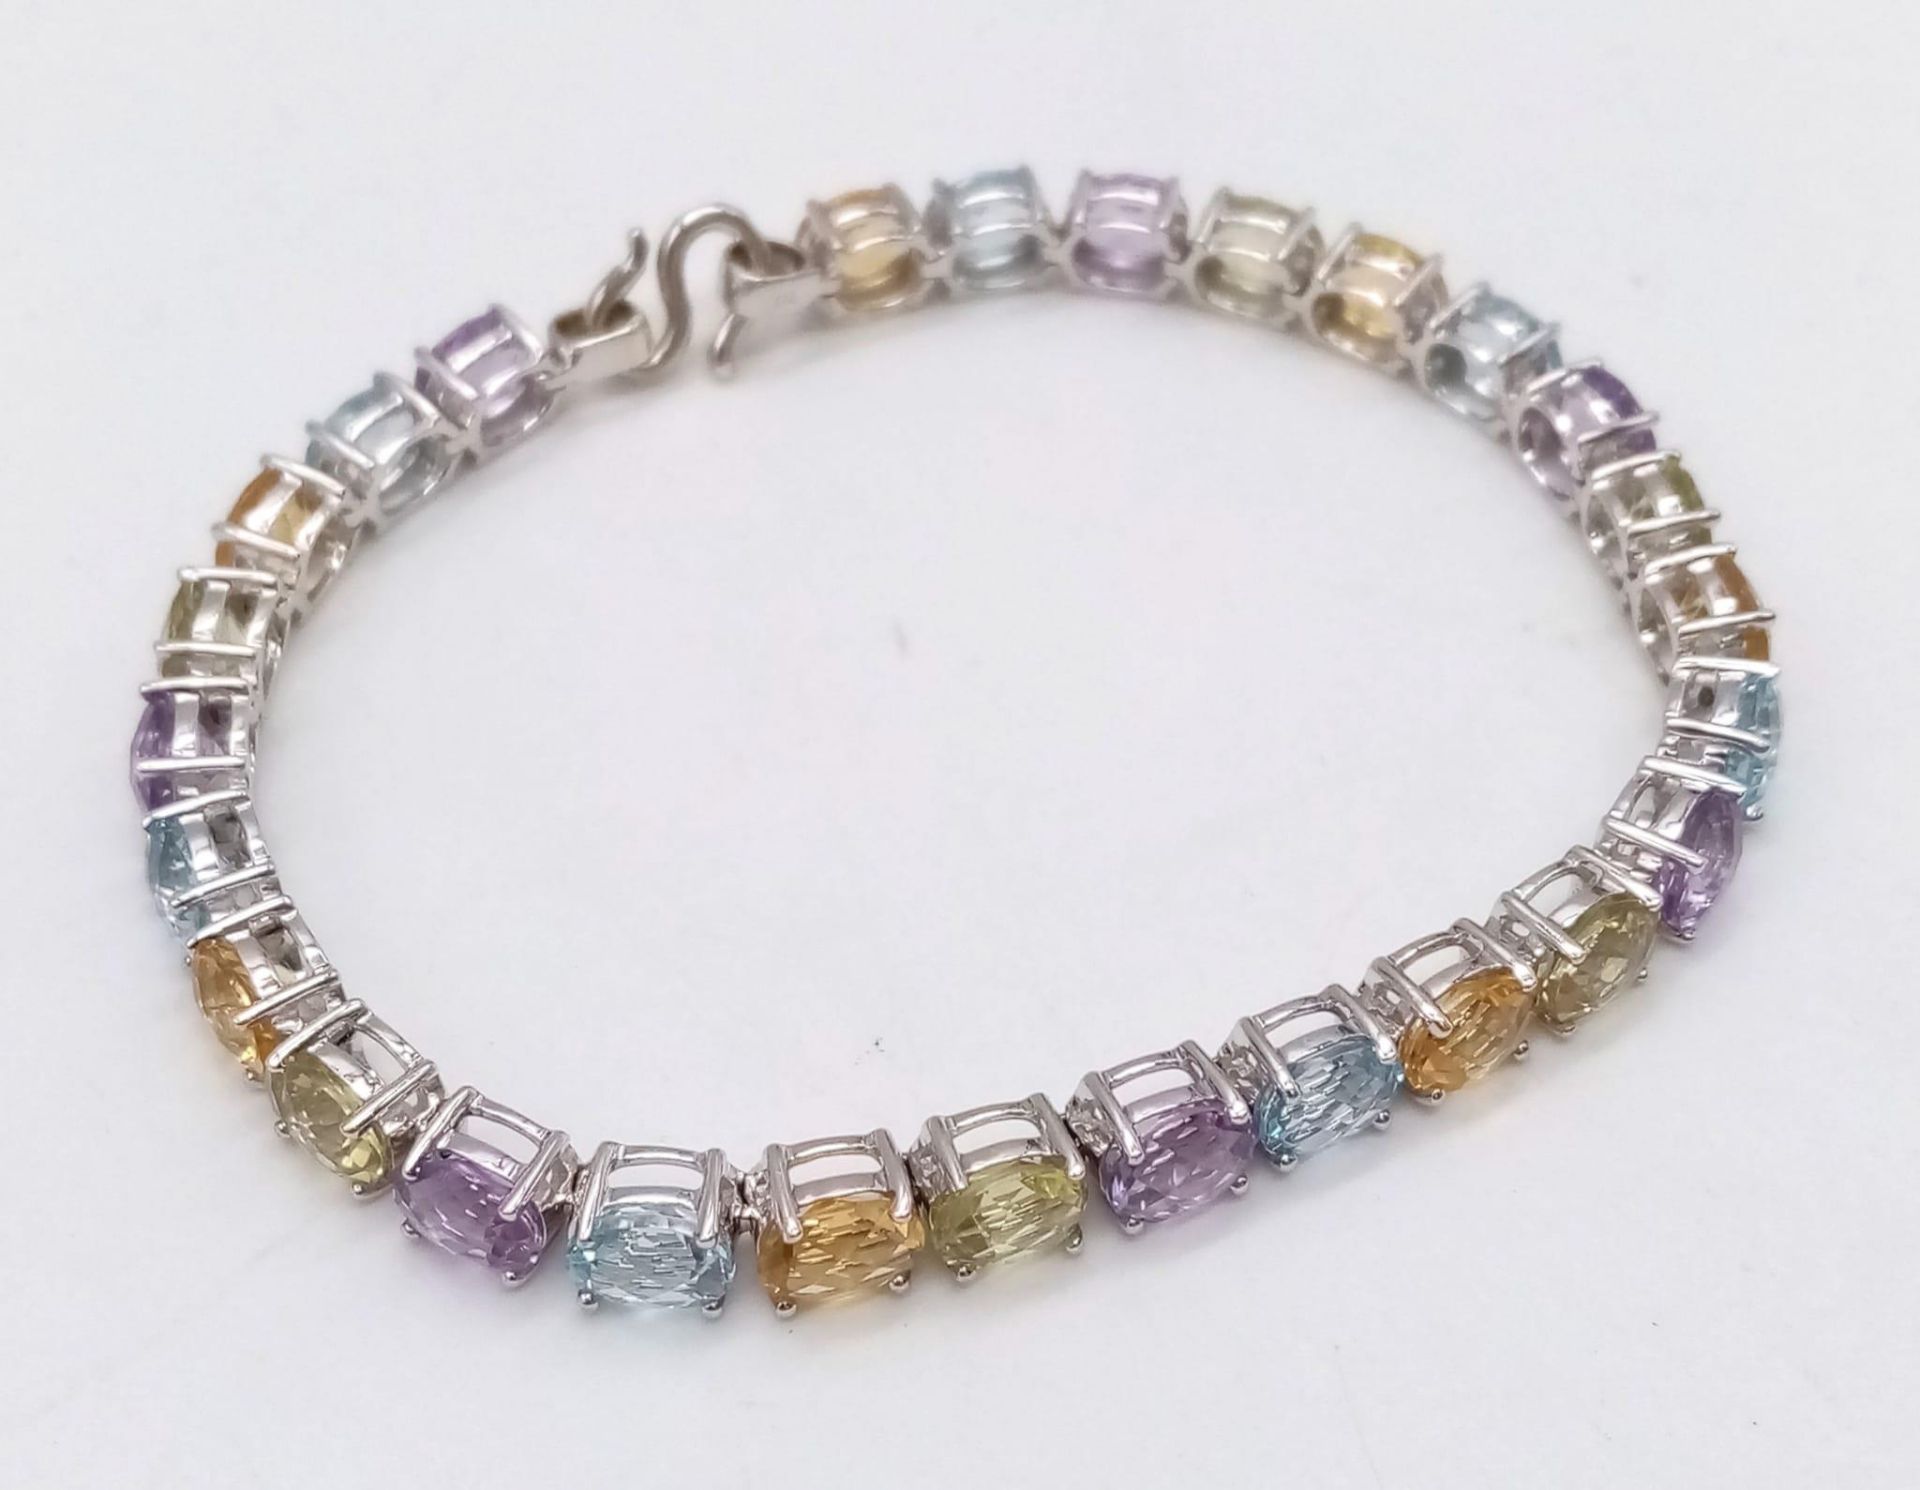 A 9K White Gold Multi-Gemstone Tennis Bracelet. Includes beautifully oval-cut faceted amethyst, - Image 2 of 6